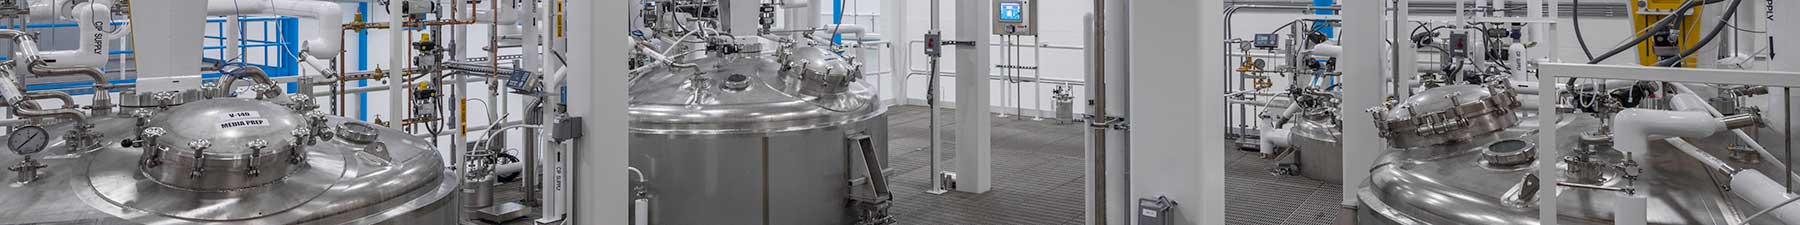 Probiotic production manufacturing machinery